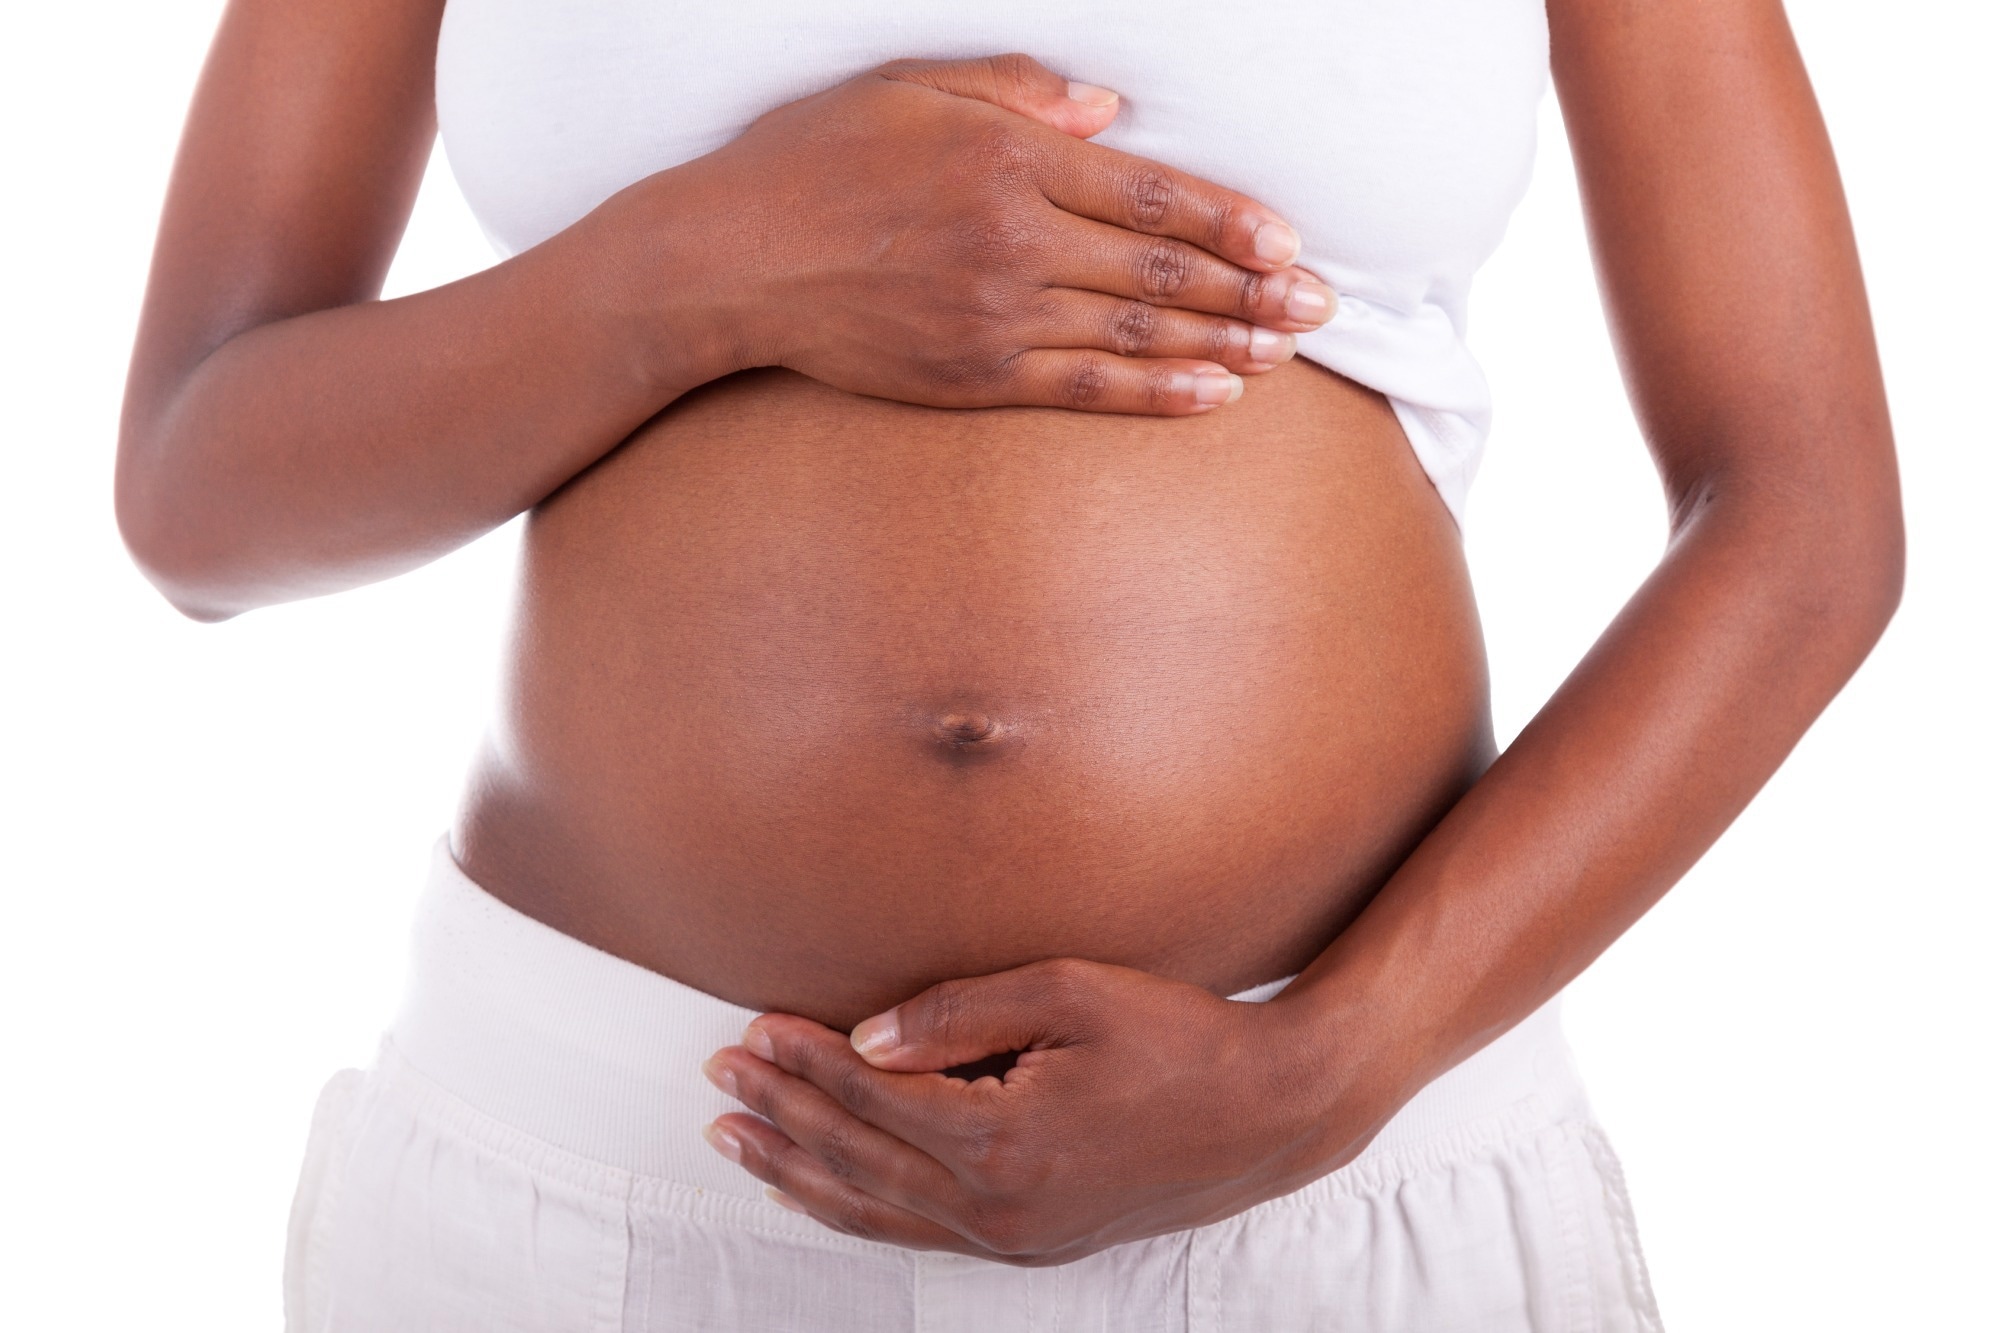 Study: 64 Exploring Black birthing people’s perspectives on racial concordance with obstetric care providers. Image Credit: Samuel Borges Photography / Shutterstock